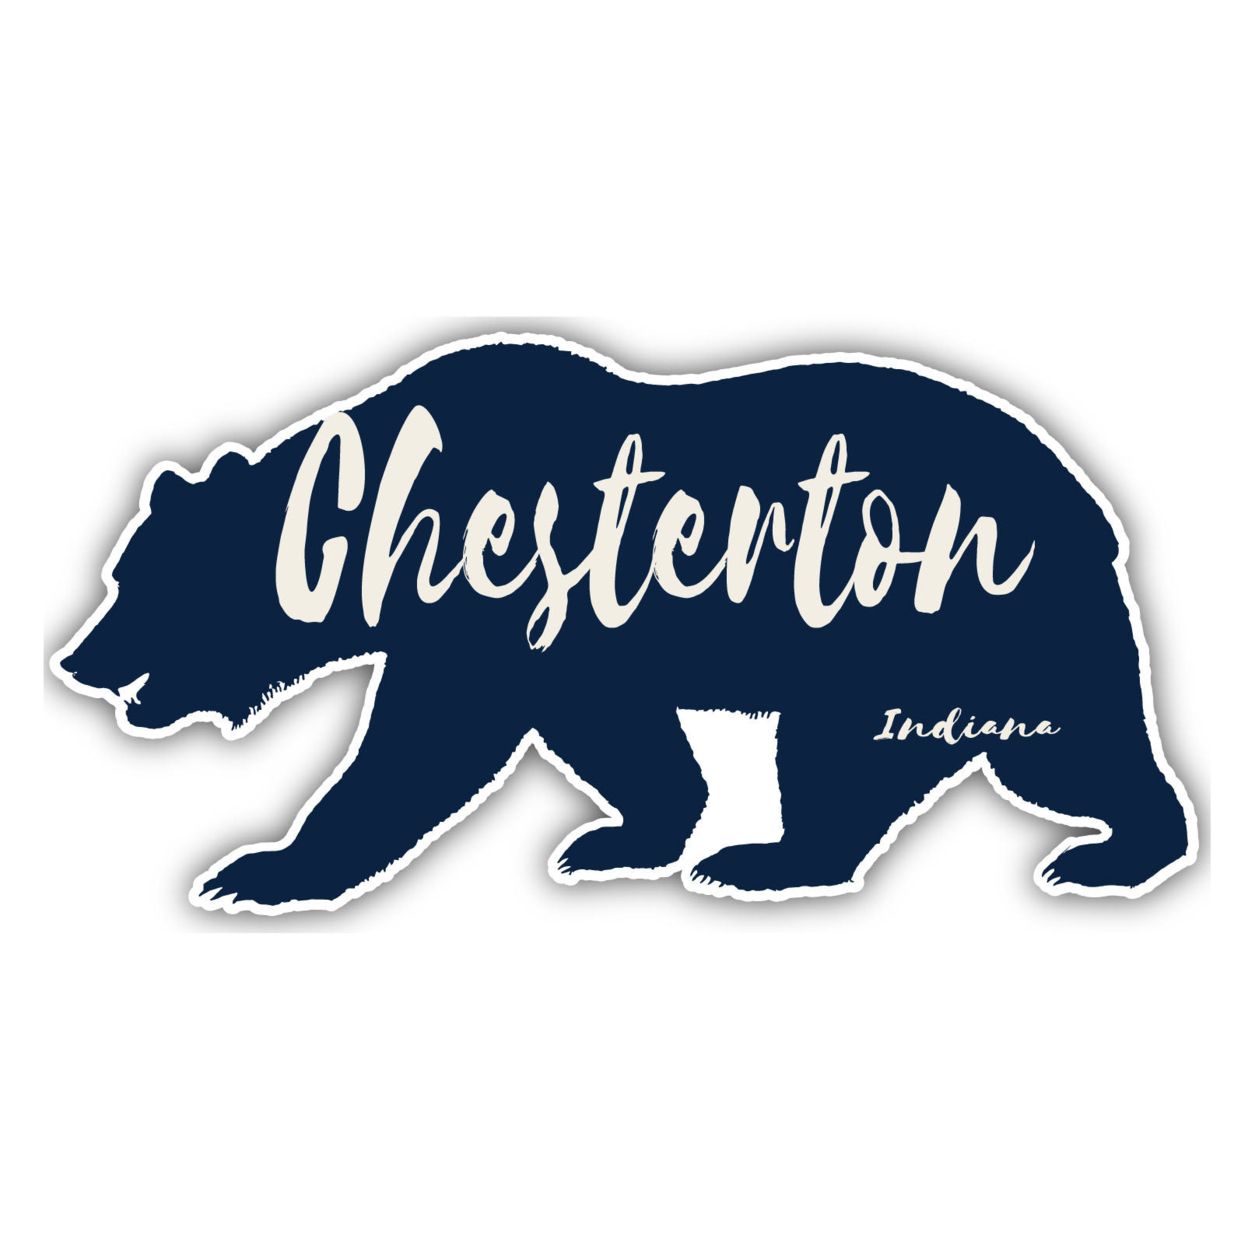 Chesterton Indiana Souvenir Decorative Stickers (Choose Theme And Size) - 4-Pack, 10-Inch, Tent